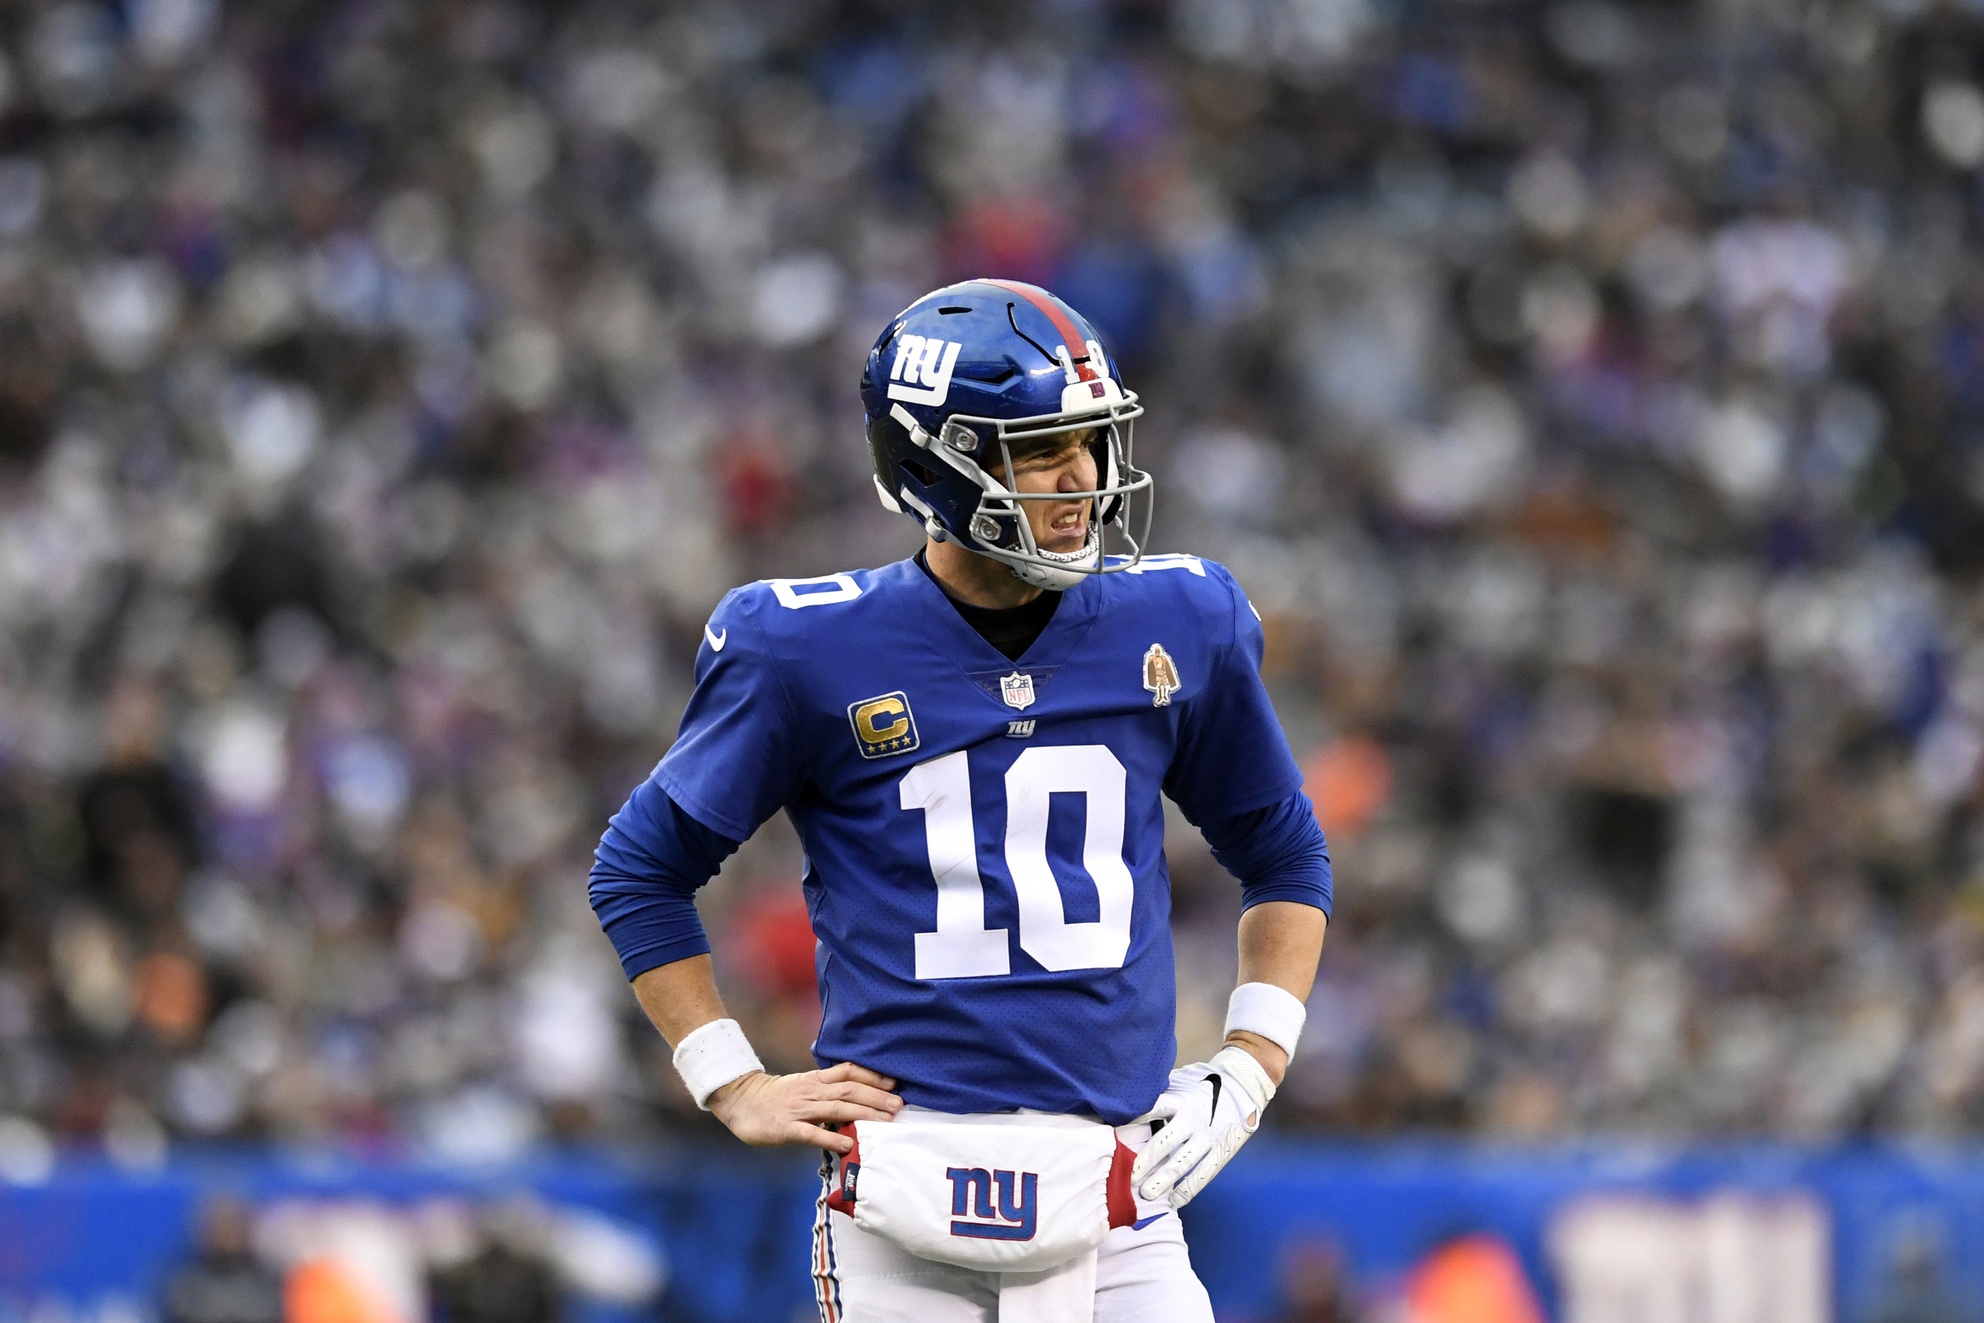 WATCH: Eli Manning is taking this preseason thing seriously